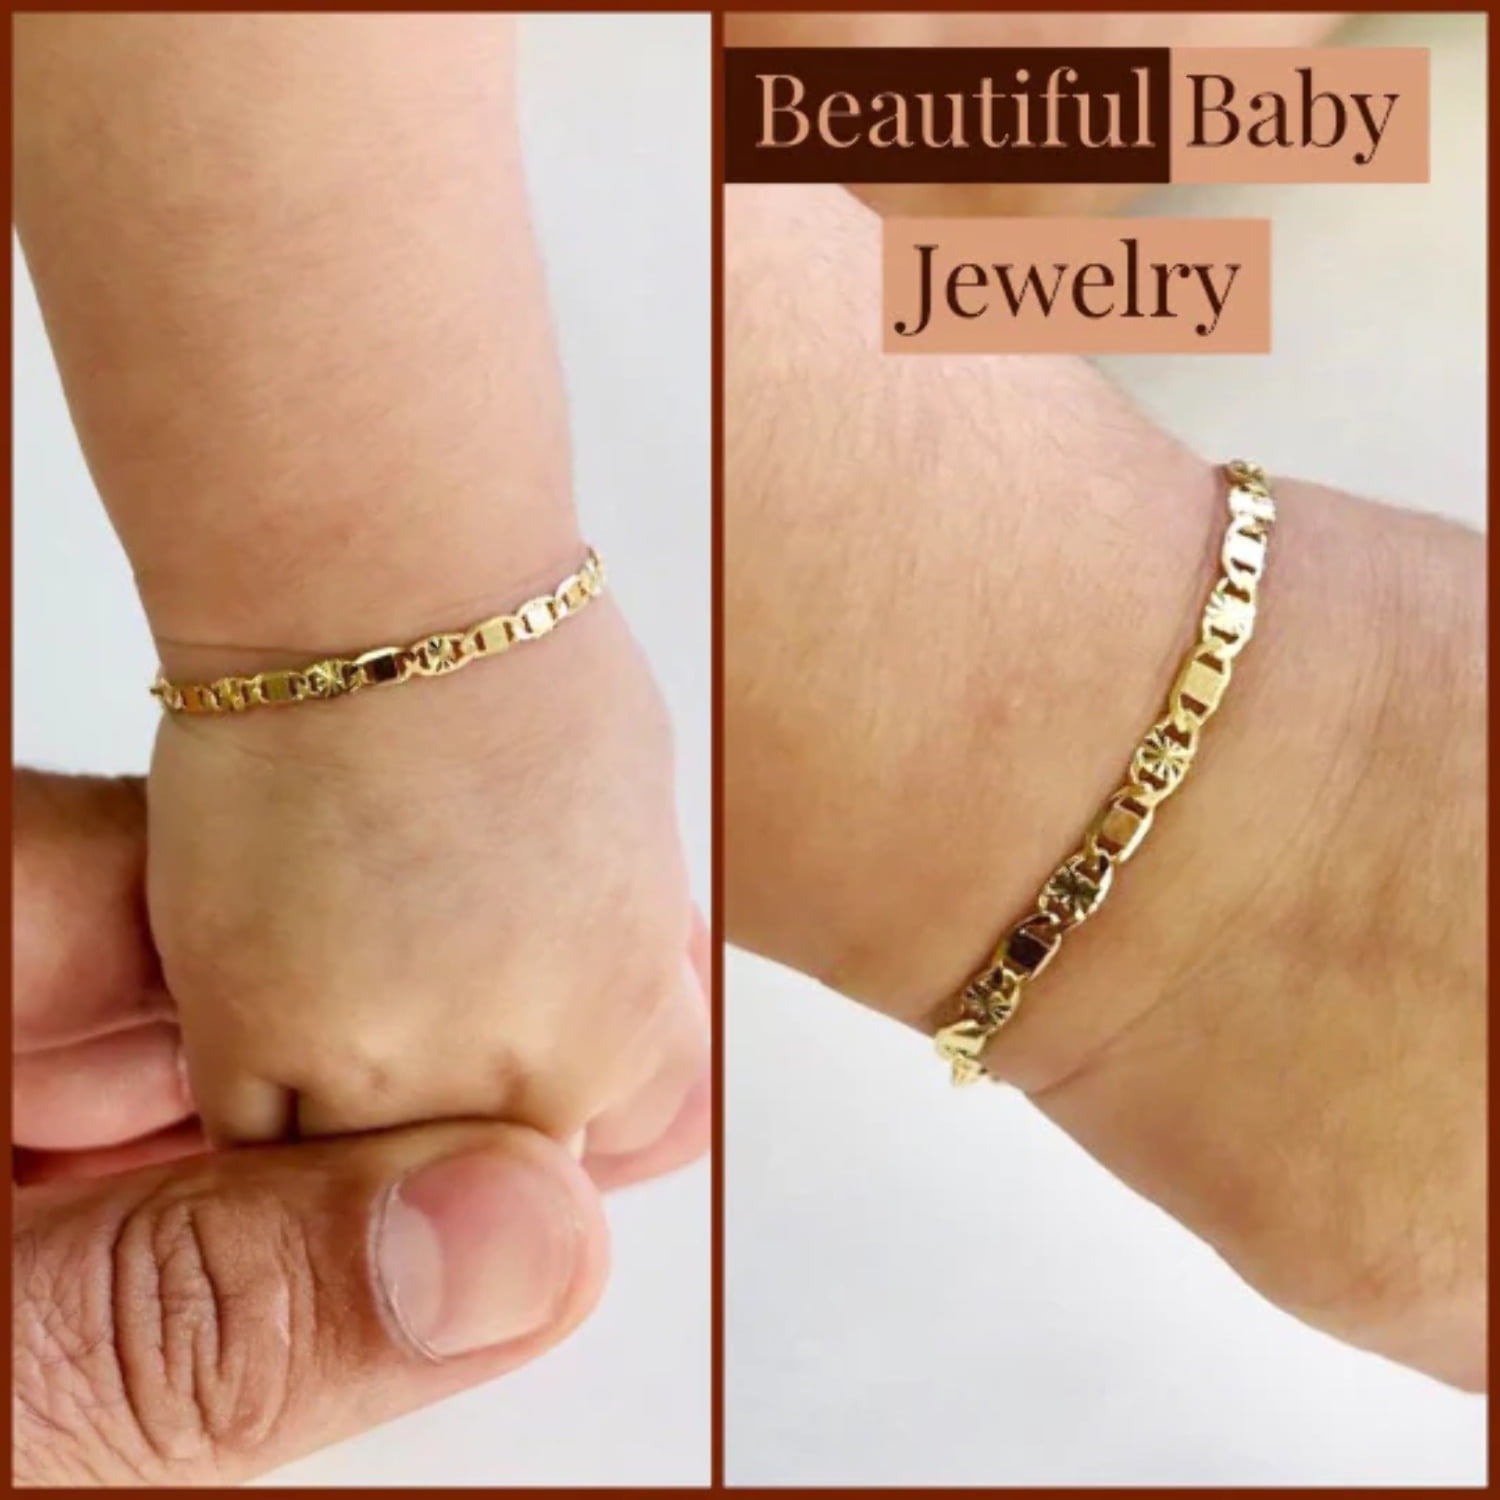 Use Walmart Jewelry Department For Your Shopping List | Baby jewelry gold,  Kids gold jewelry, Baby bracelet gold